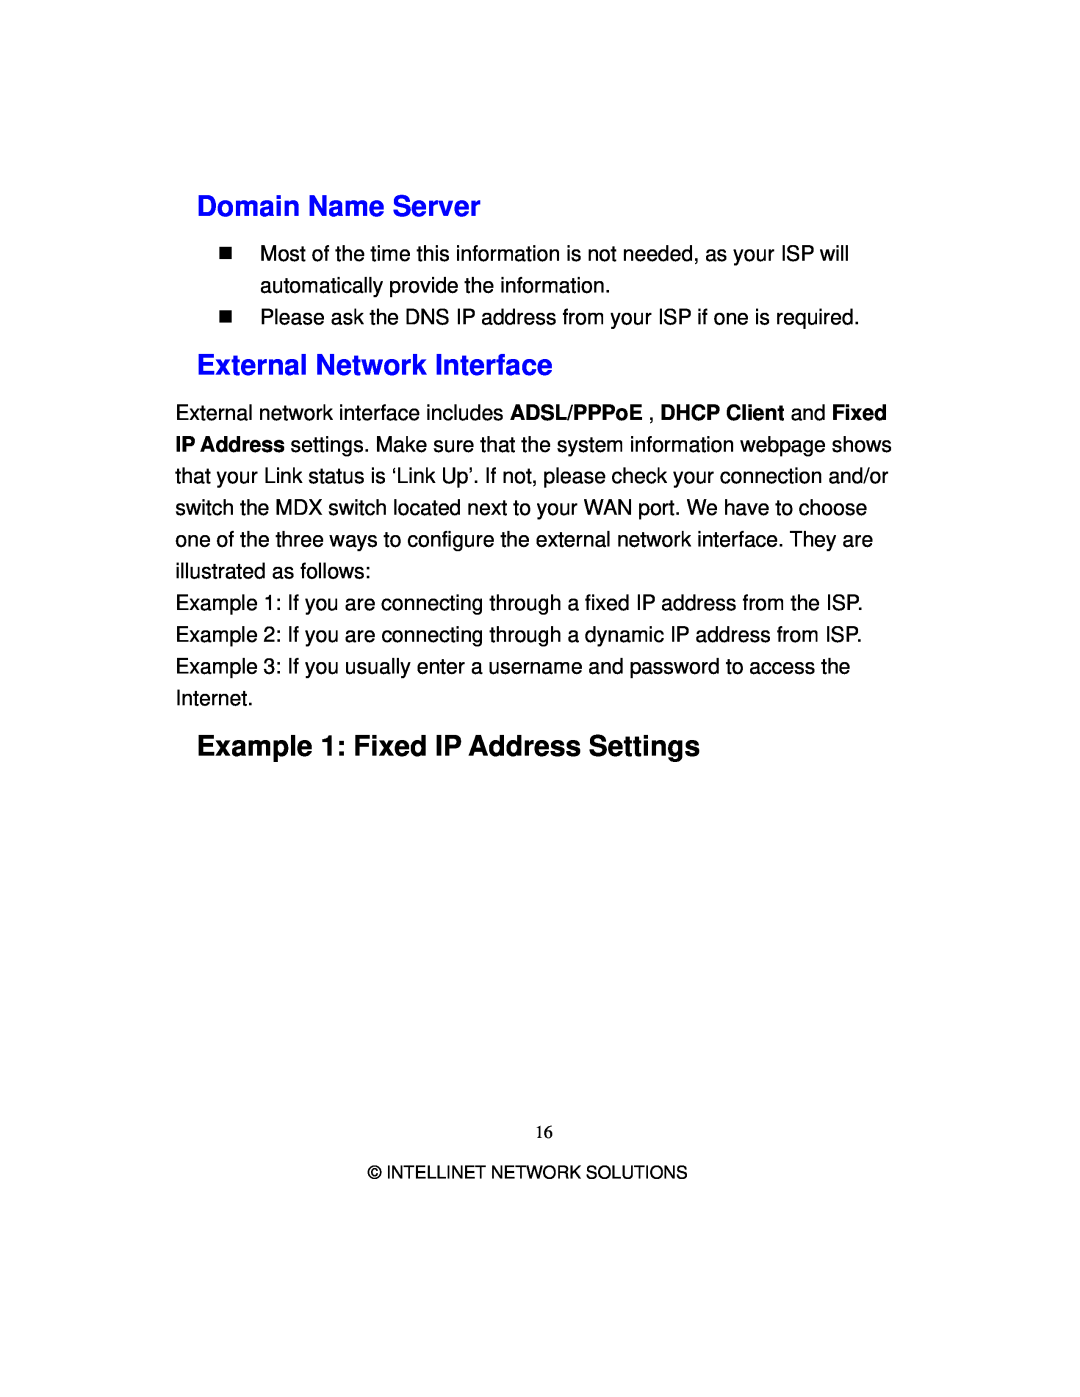 Intellinet Network Solutions 501705 Domain Name Server, External Network Interface, Example 1 Fixed IP Address Settings 